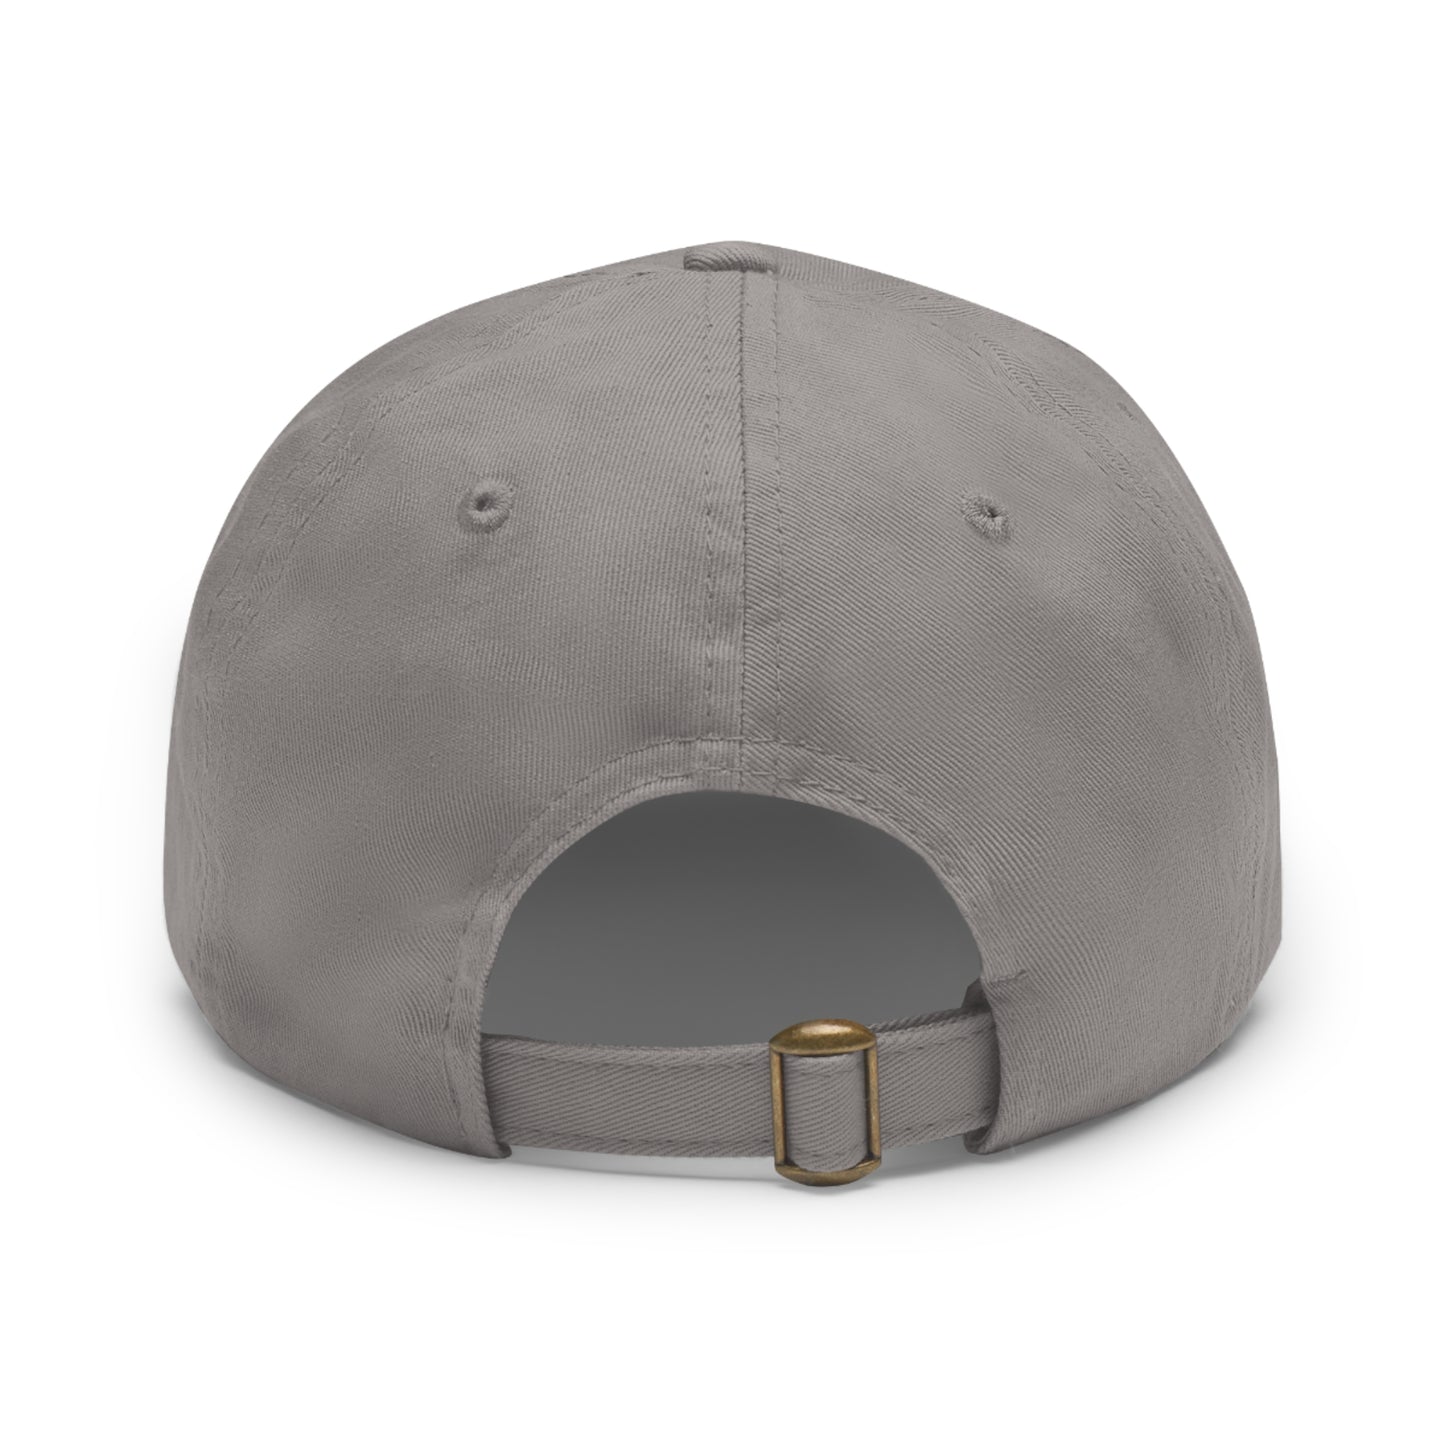 Hunting Styled hat (Leather Patch)